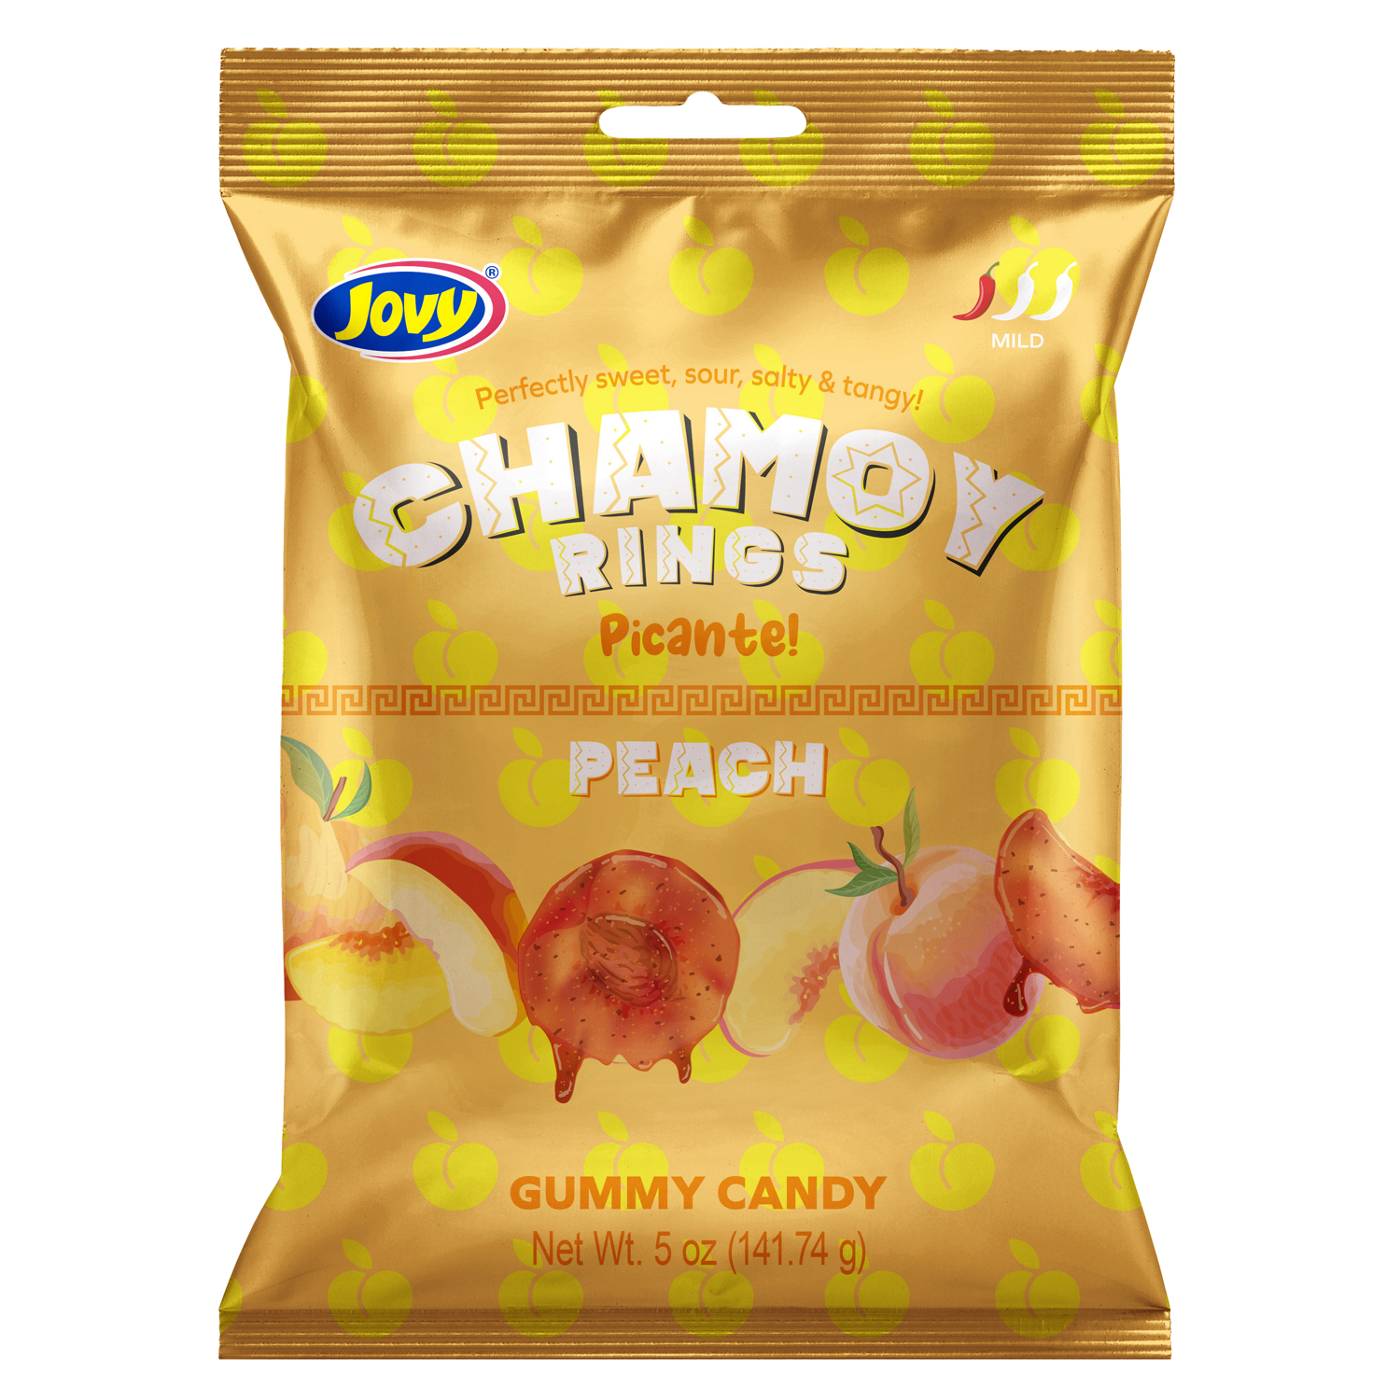 Jovy Peach Chamoy Rings Gummy Candy; image 1 of 2